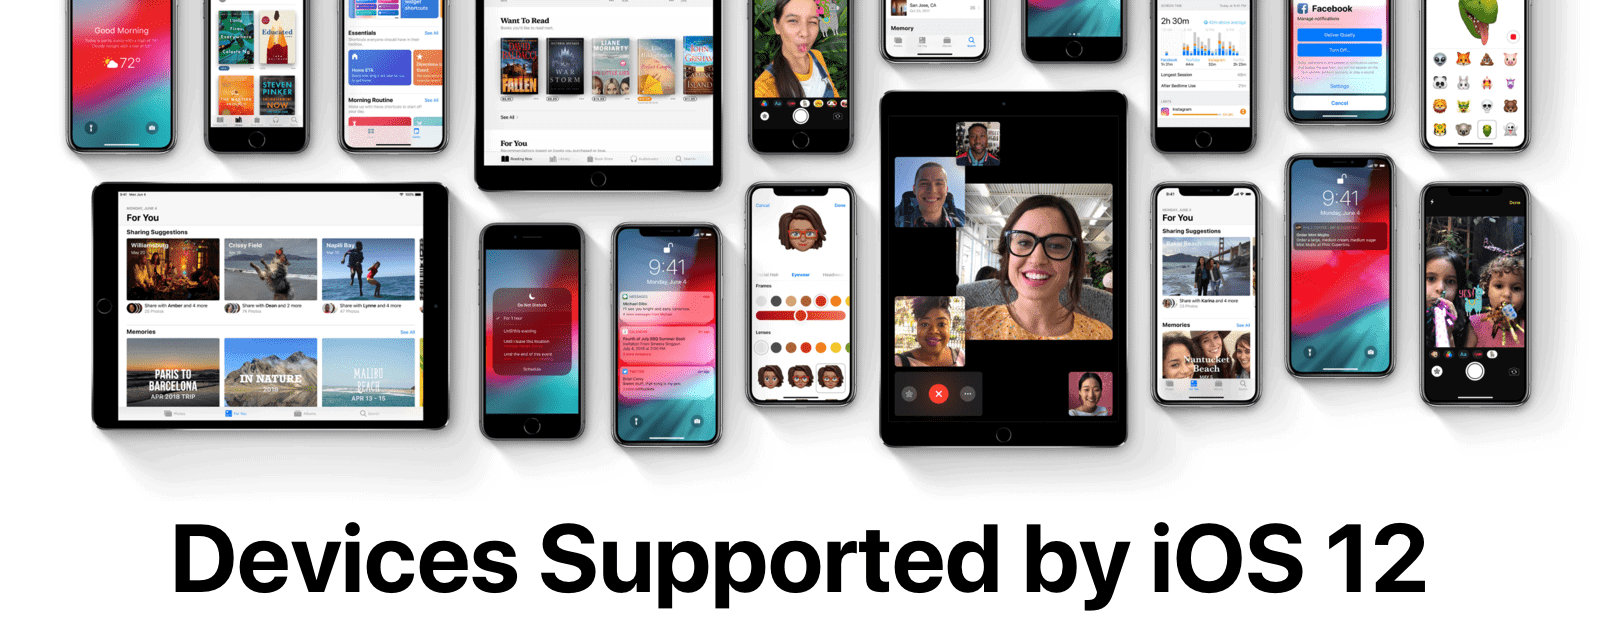 Here are the iOS Devices Supported by iOS 12